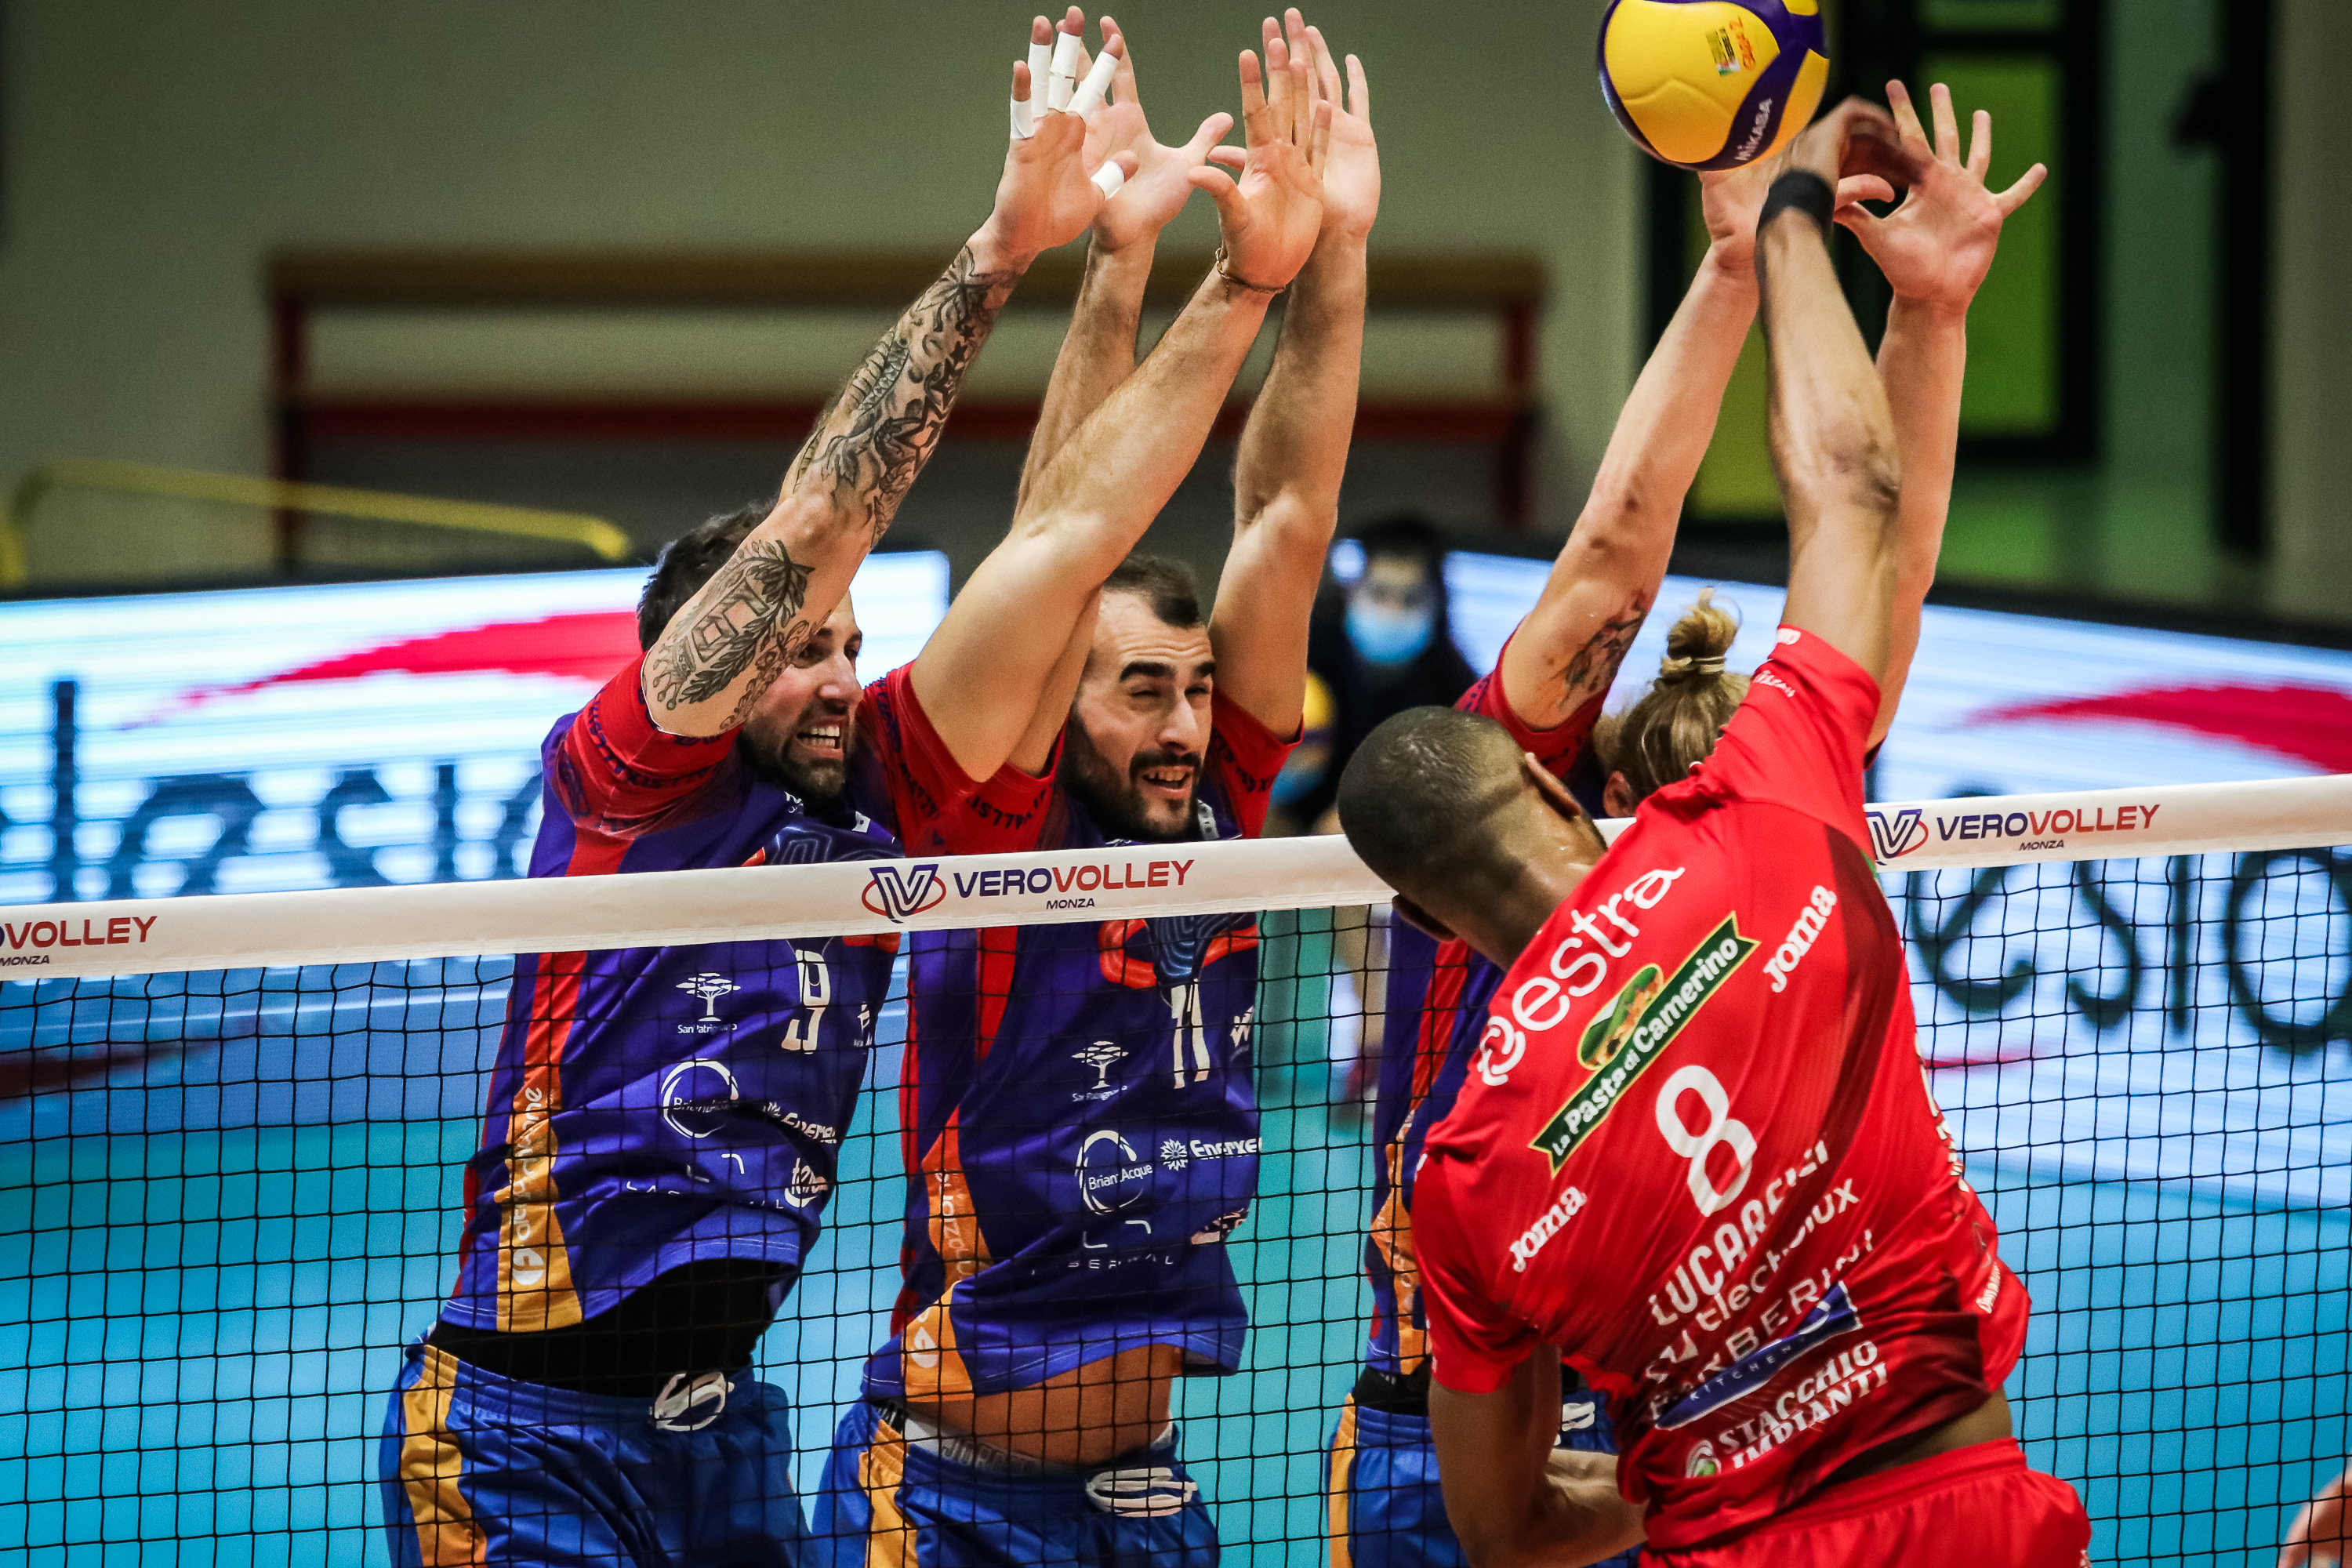 Its Playoffs time in Italy! volleyballworld